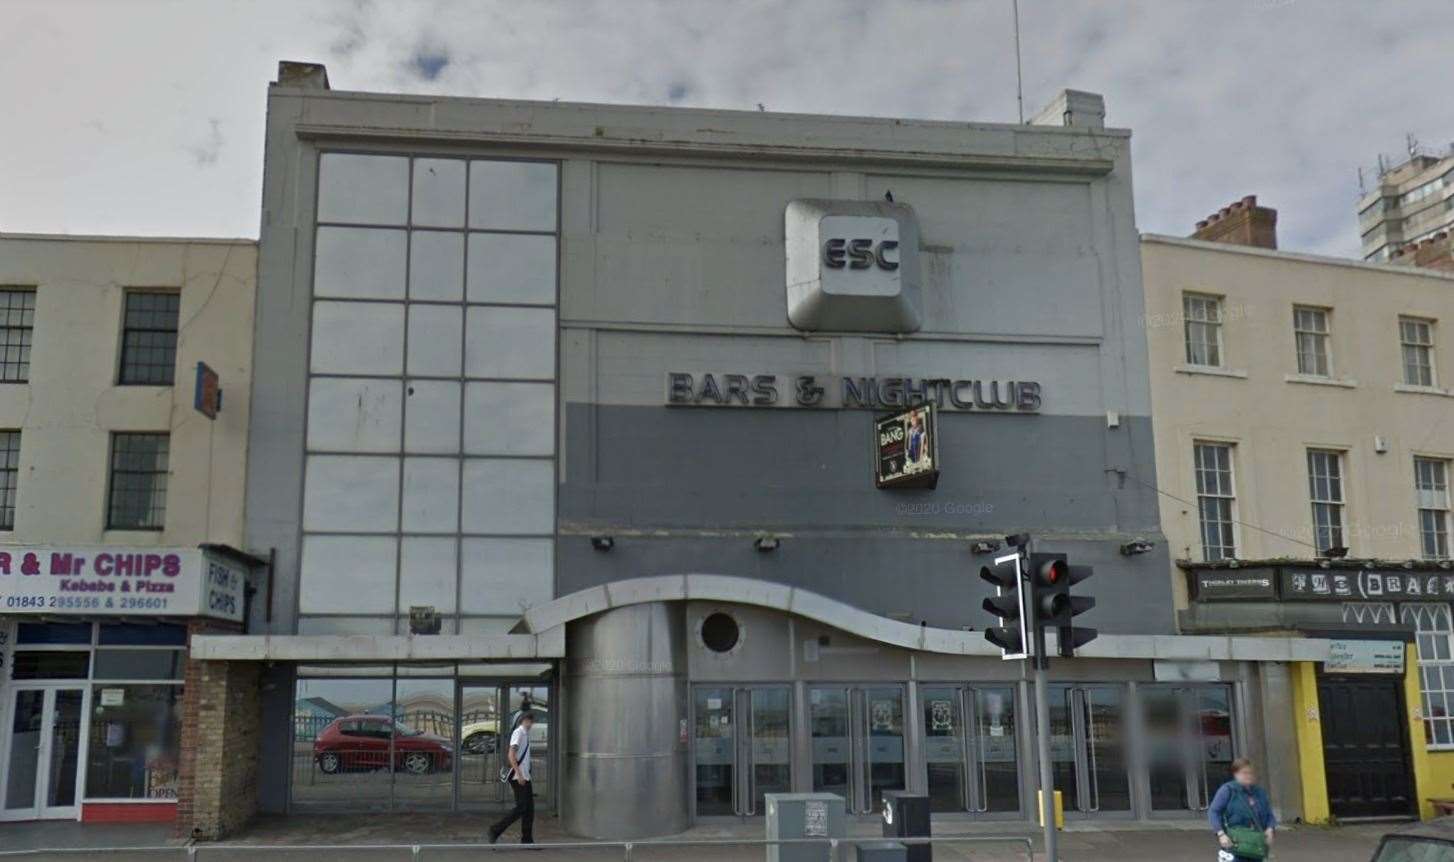 The former Escape nightclub in Margate is set to be demolished. Picture: Google